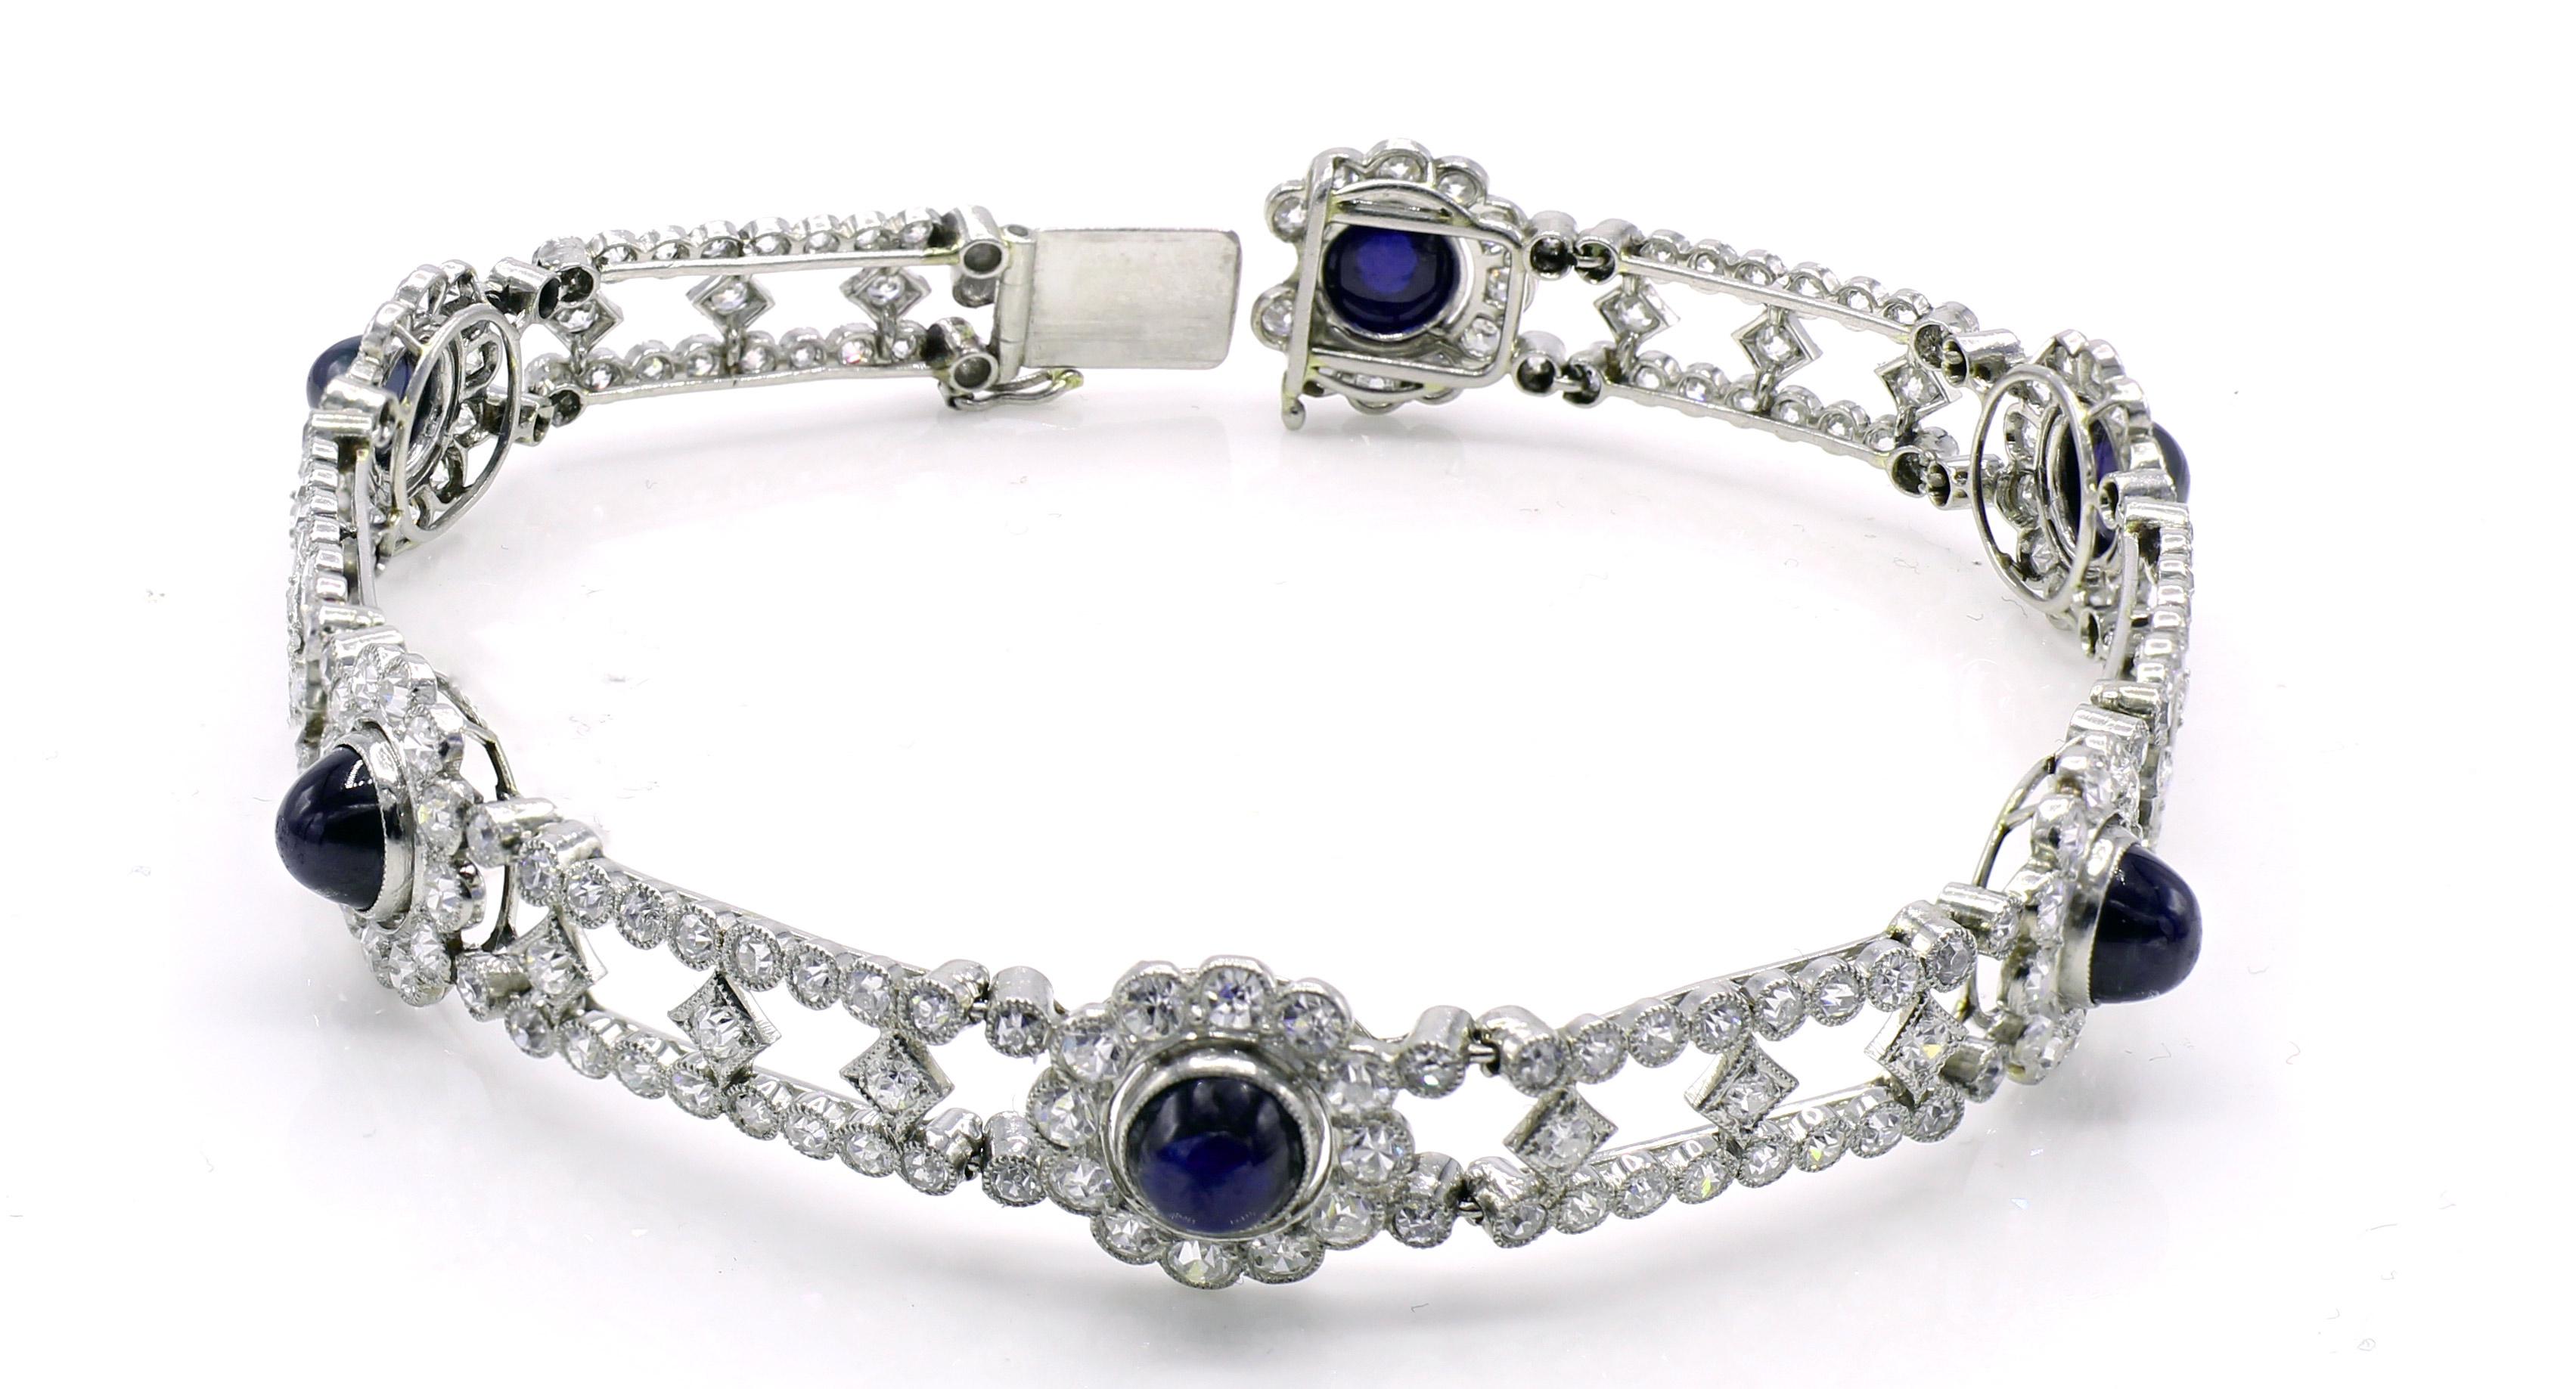 Beautifully designed and magnificently handcrafted Edwardian bracelet from ca 1910. Bezel set with bright white diamonds and detailed with milligrain on top of the bezel, the flexible sections have 5 beautiful sugar loaf cabochon sapphires